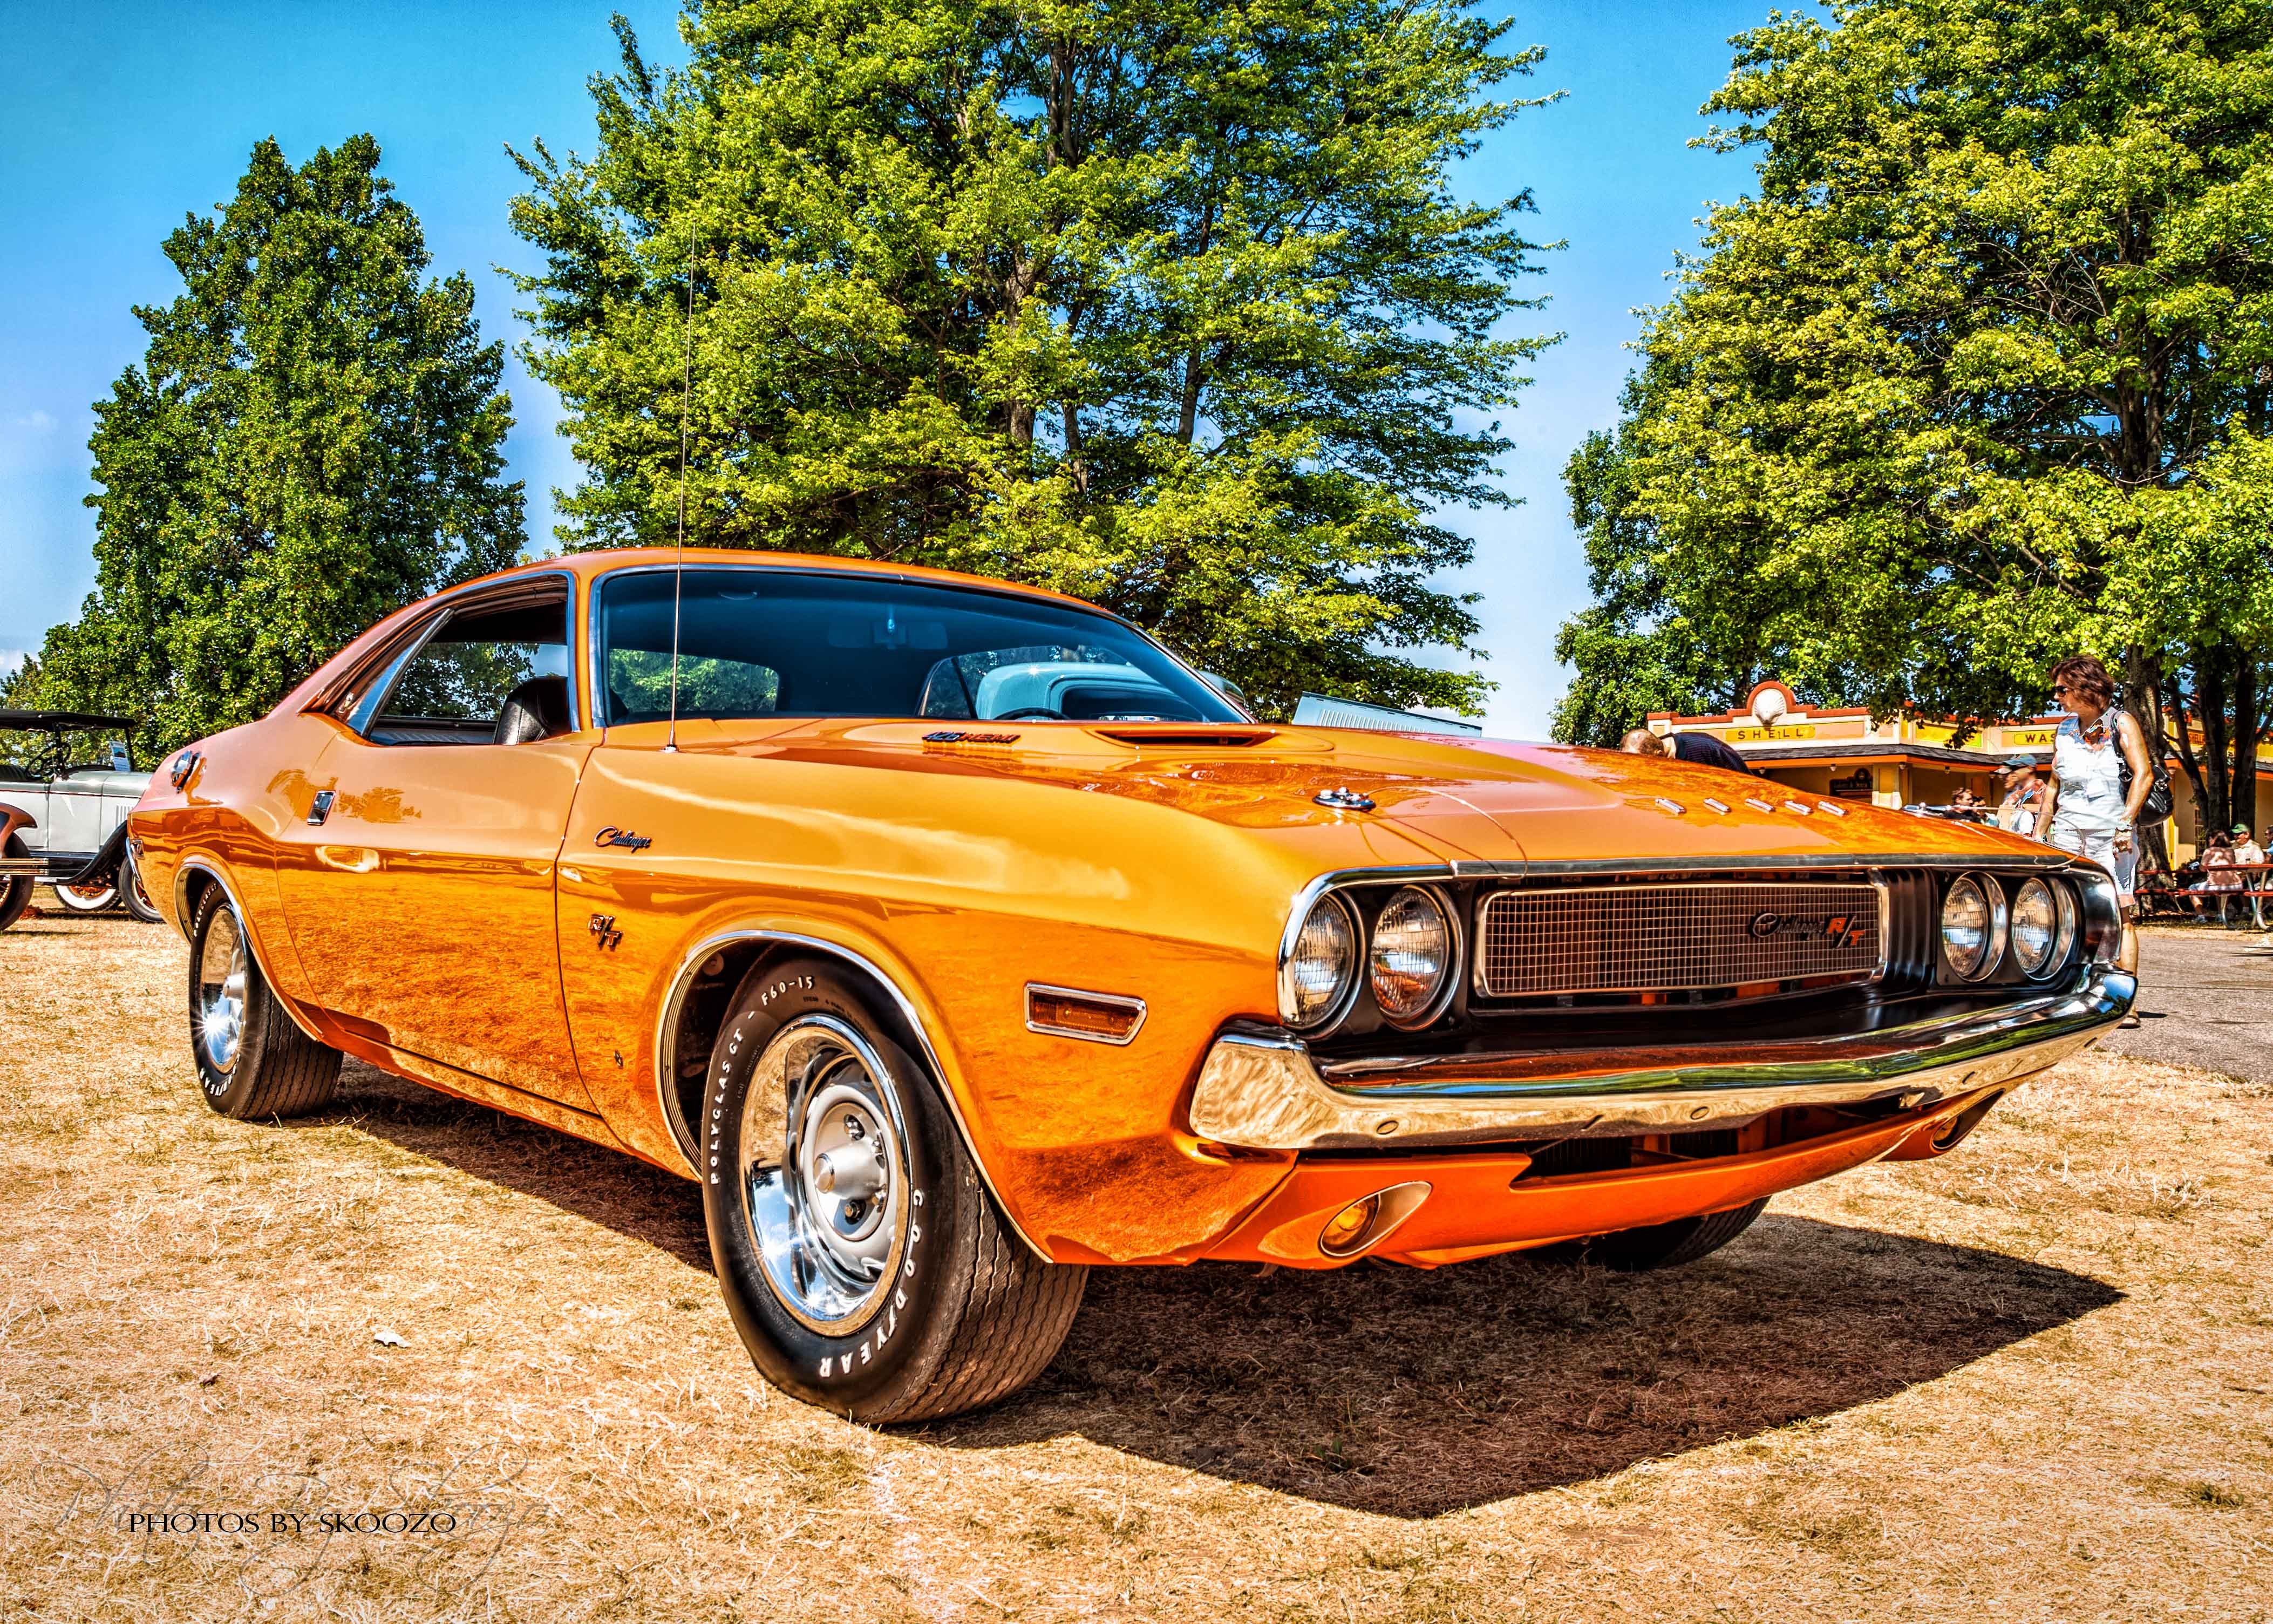 513036-1970-challenger-classic-dodge-muscle-cars.jpg